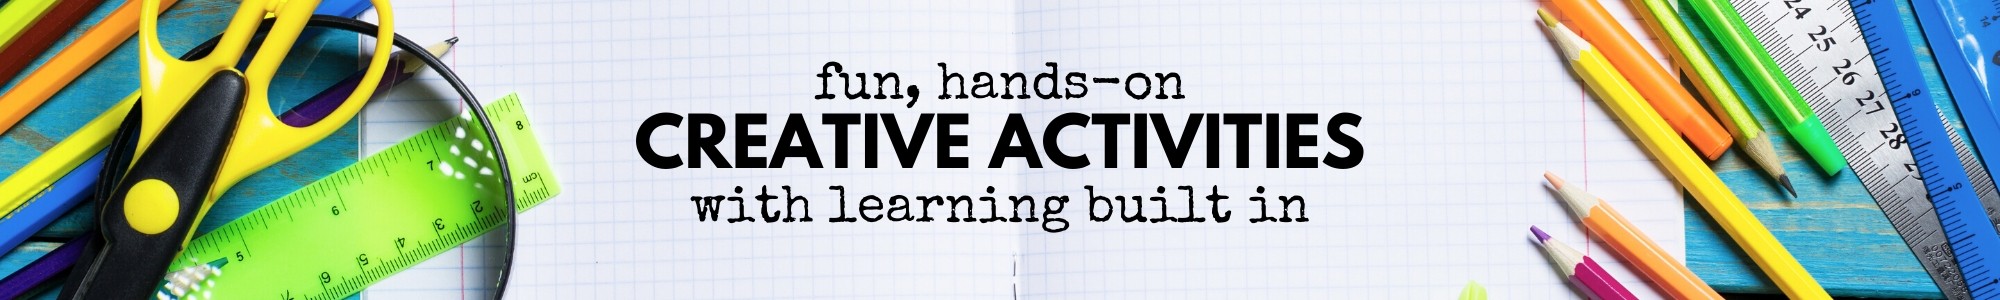 fun hands-on creative activities with learning built in 2000x300 v2